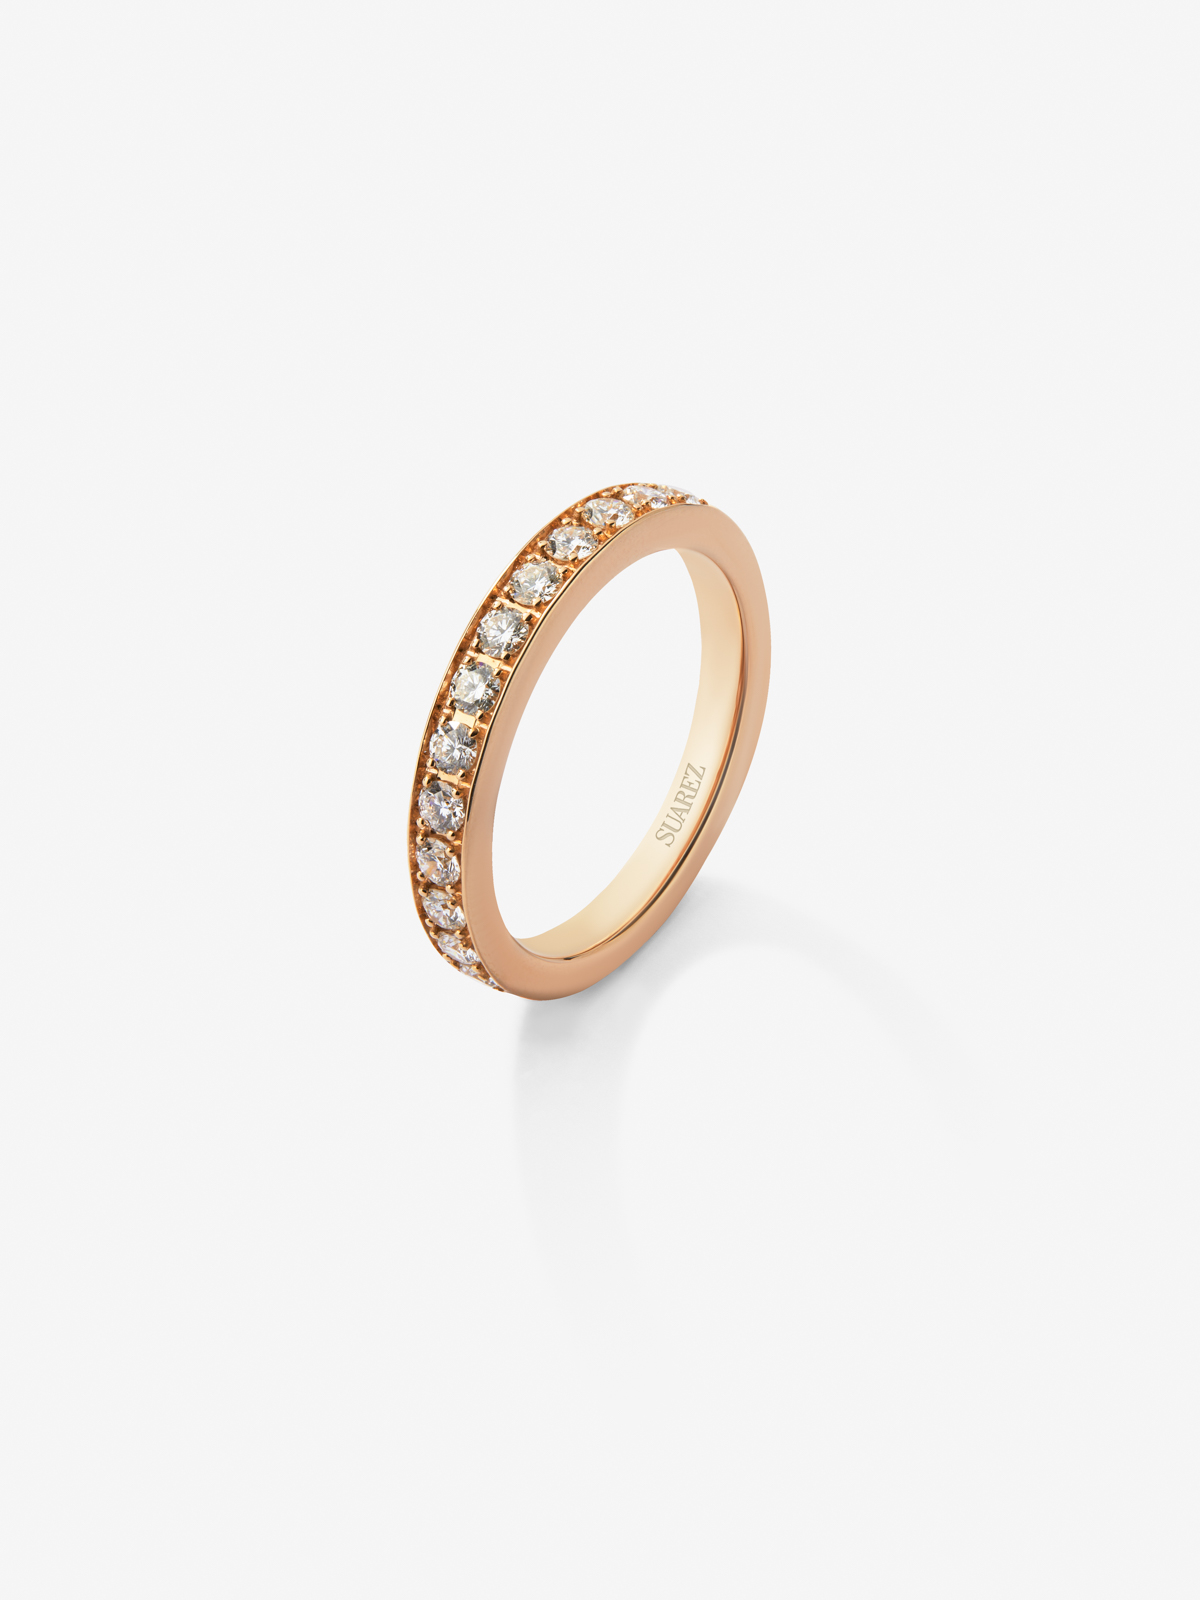 18K Rose Gold Engagement Ring with Diamonds